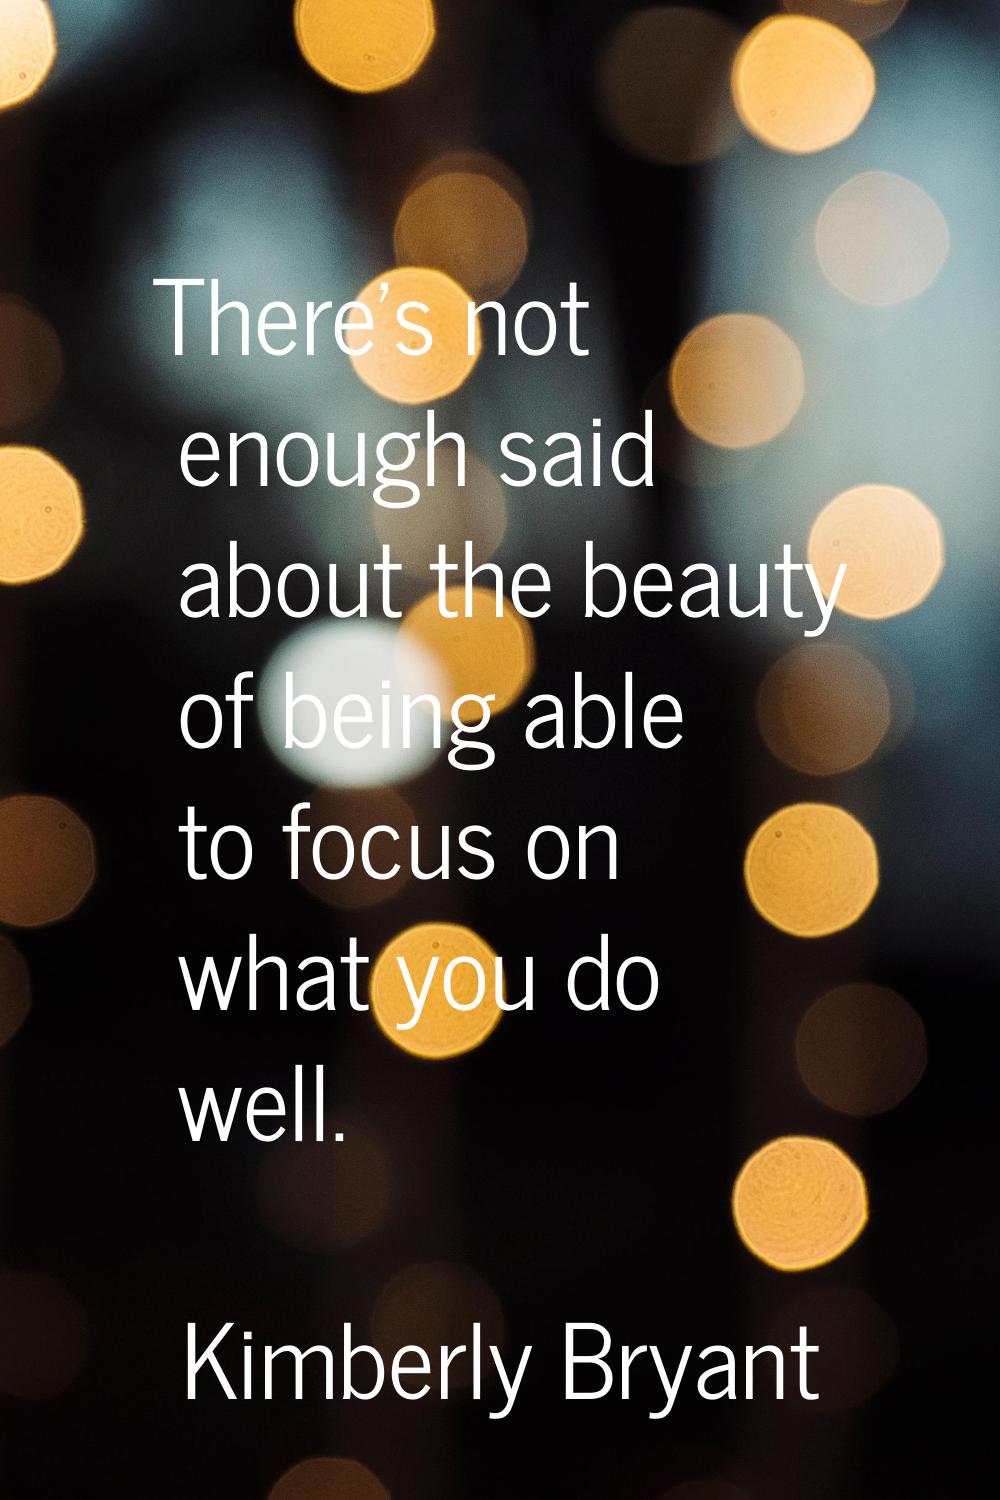 There's not enough said about the beauty of being able to focus on what you do well.